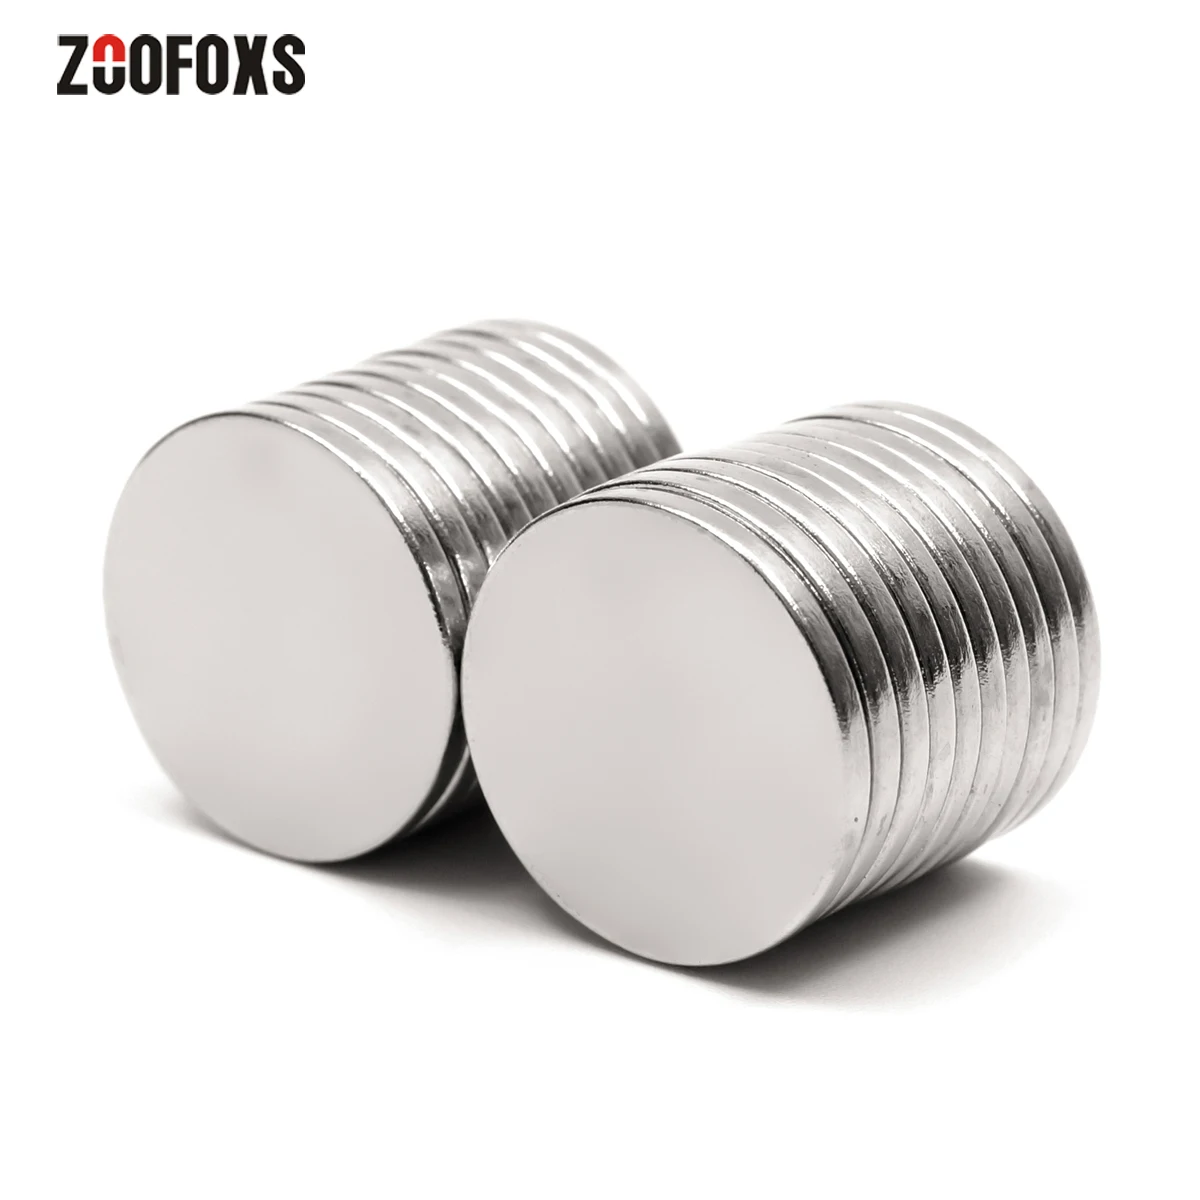 

ZOOFOXS 3pcs 20 x 2 mm N35 Small Disc Neodymium Magnet Rare Earth Powerful Strong Round Permanet Magnets 20*2